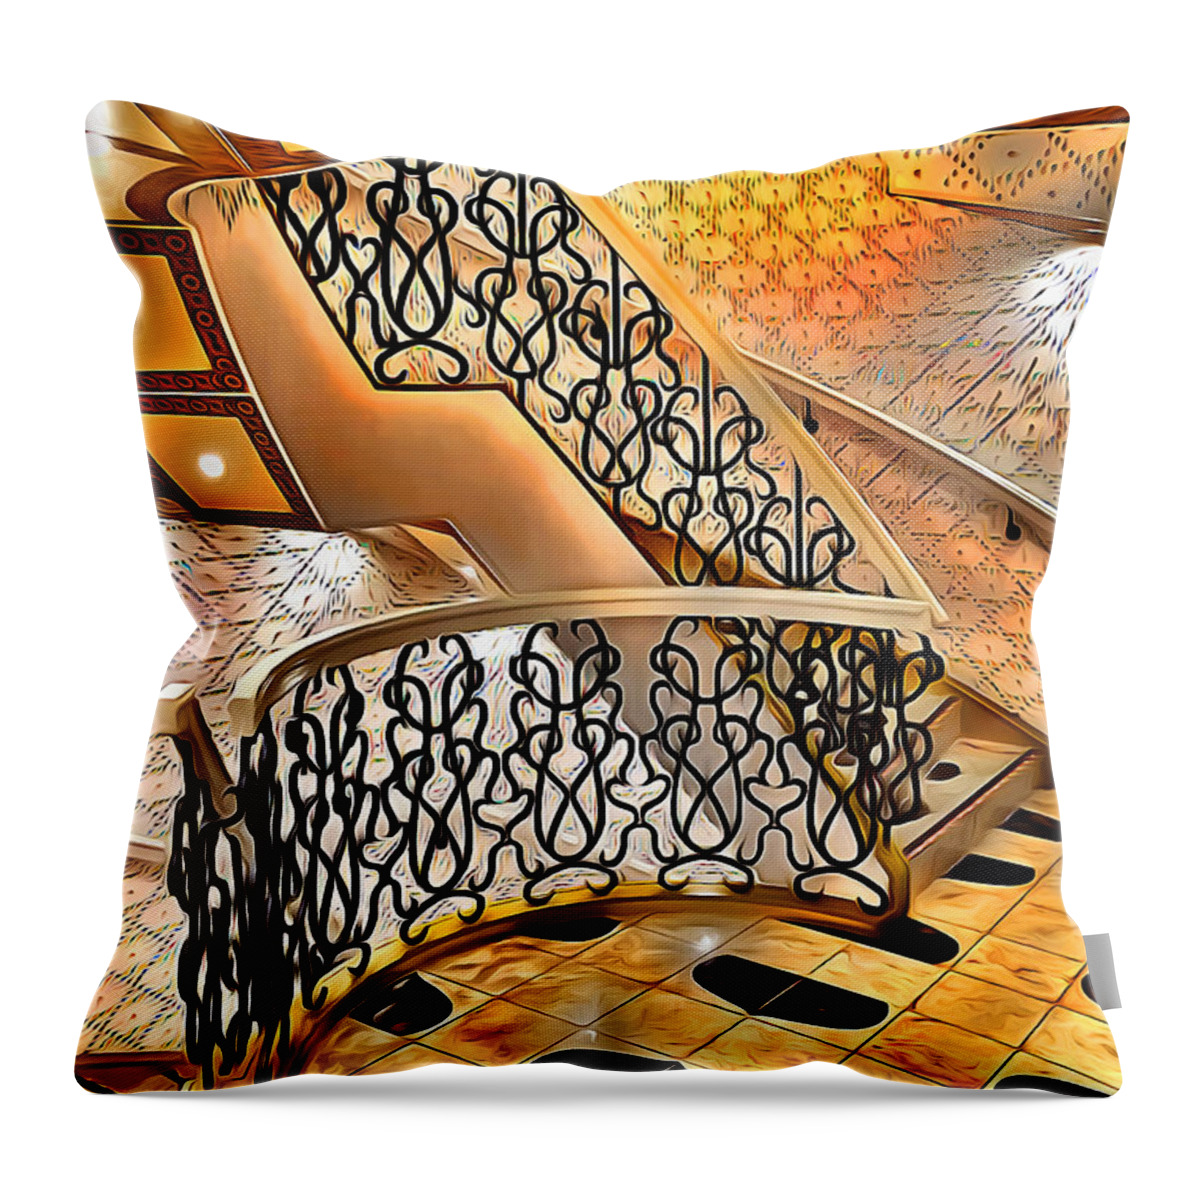 Carnival Pride Throw Pillow featuring the digital art Carnival Pride Stairs by Stephen Younts